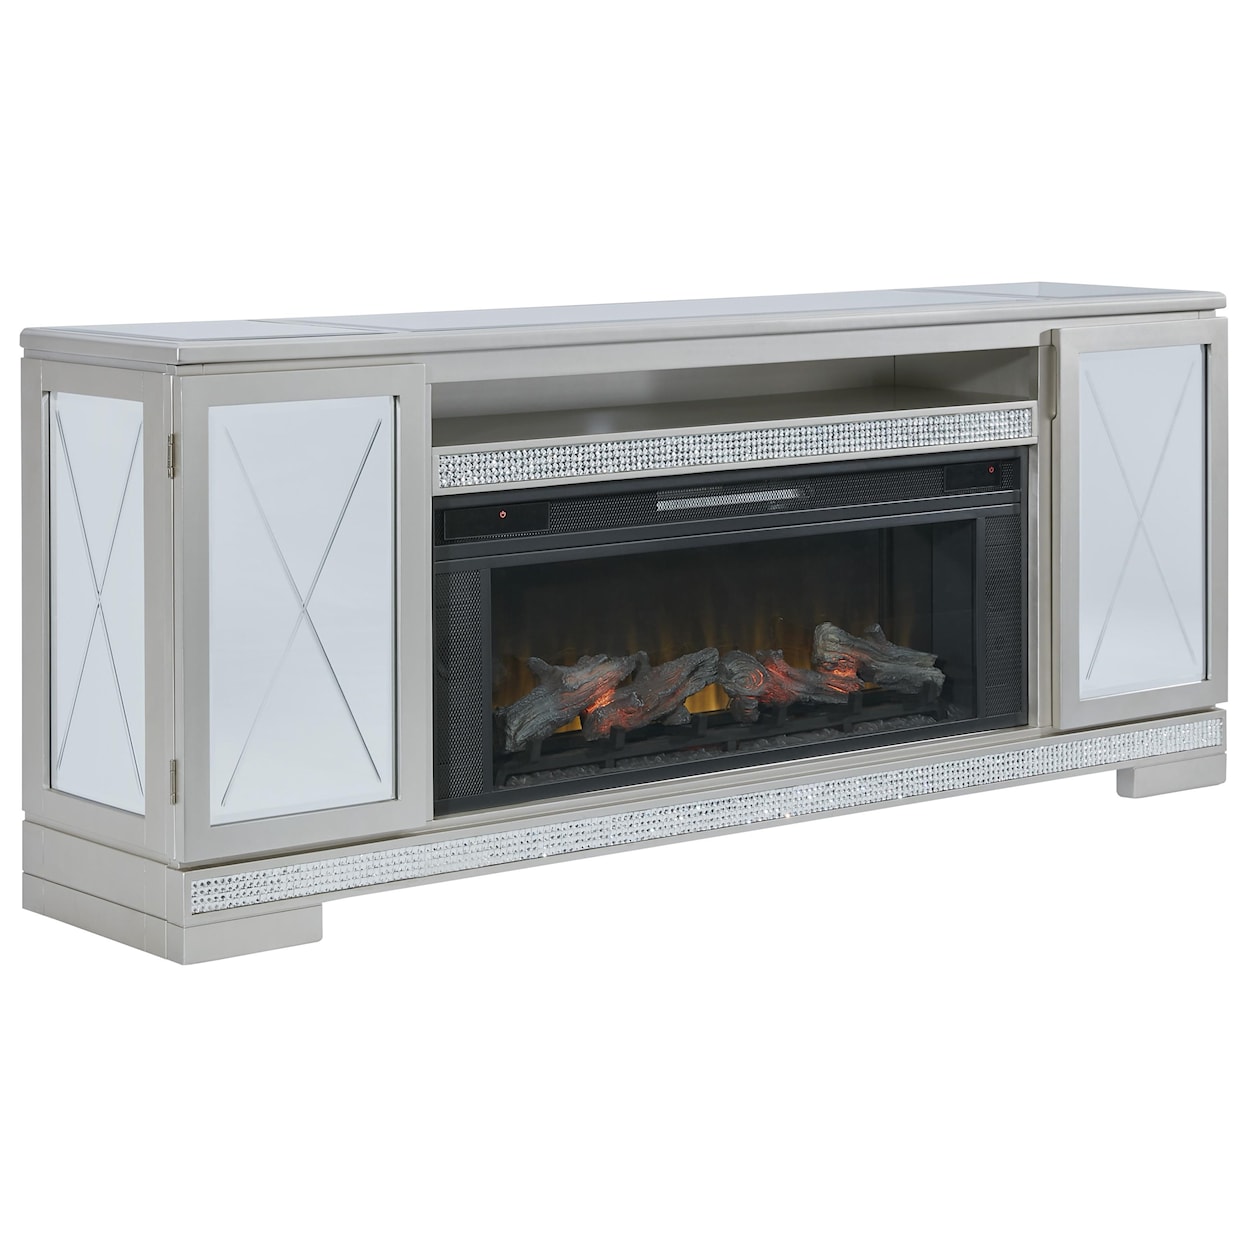 Signature Design by Ashley Flamory 72" TV Stand with Electric Fireplace